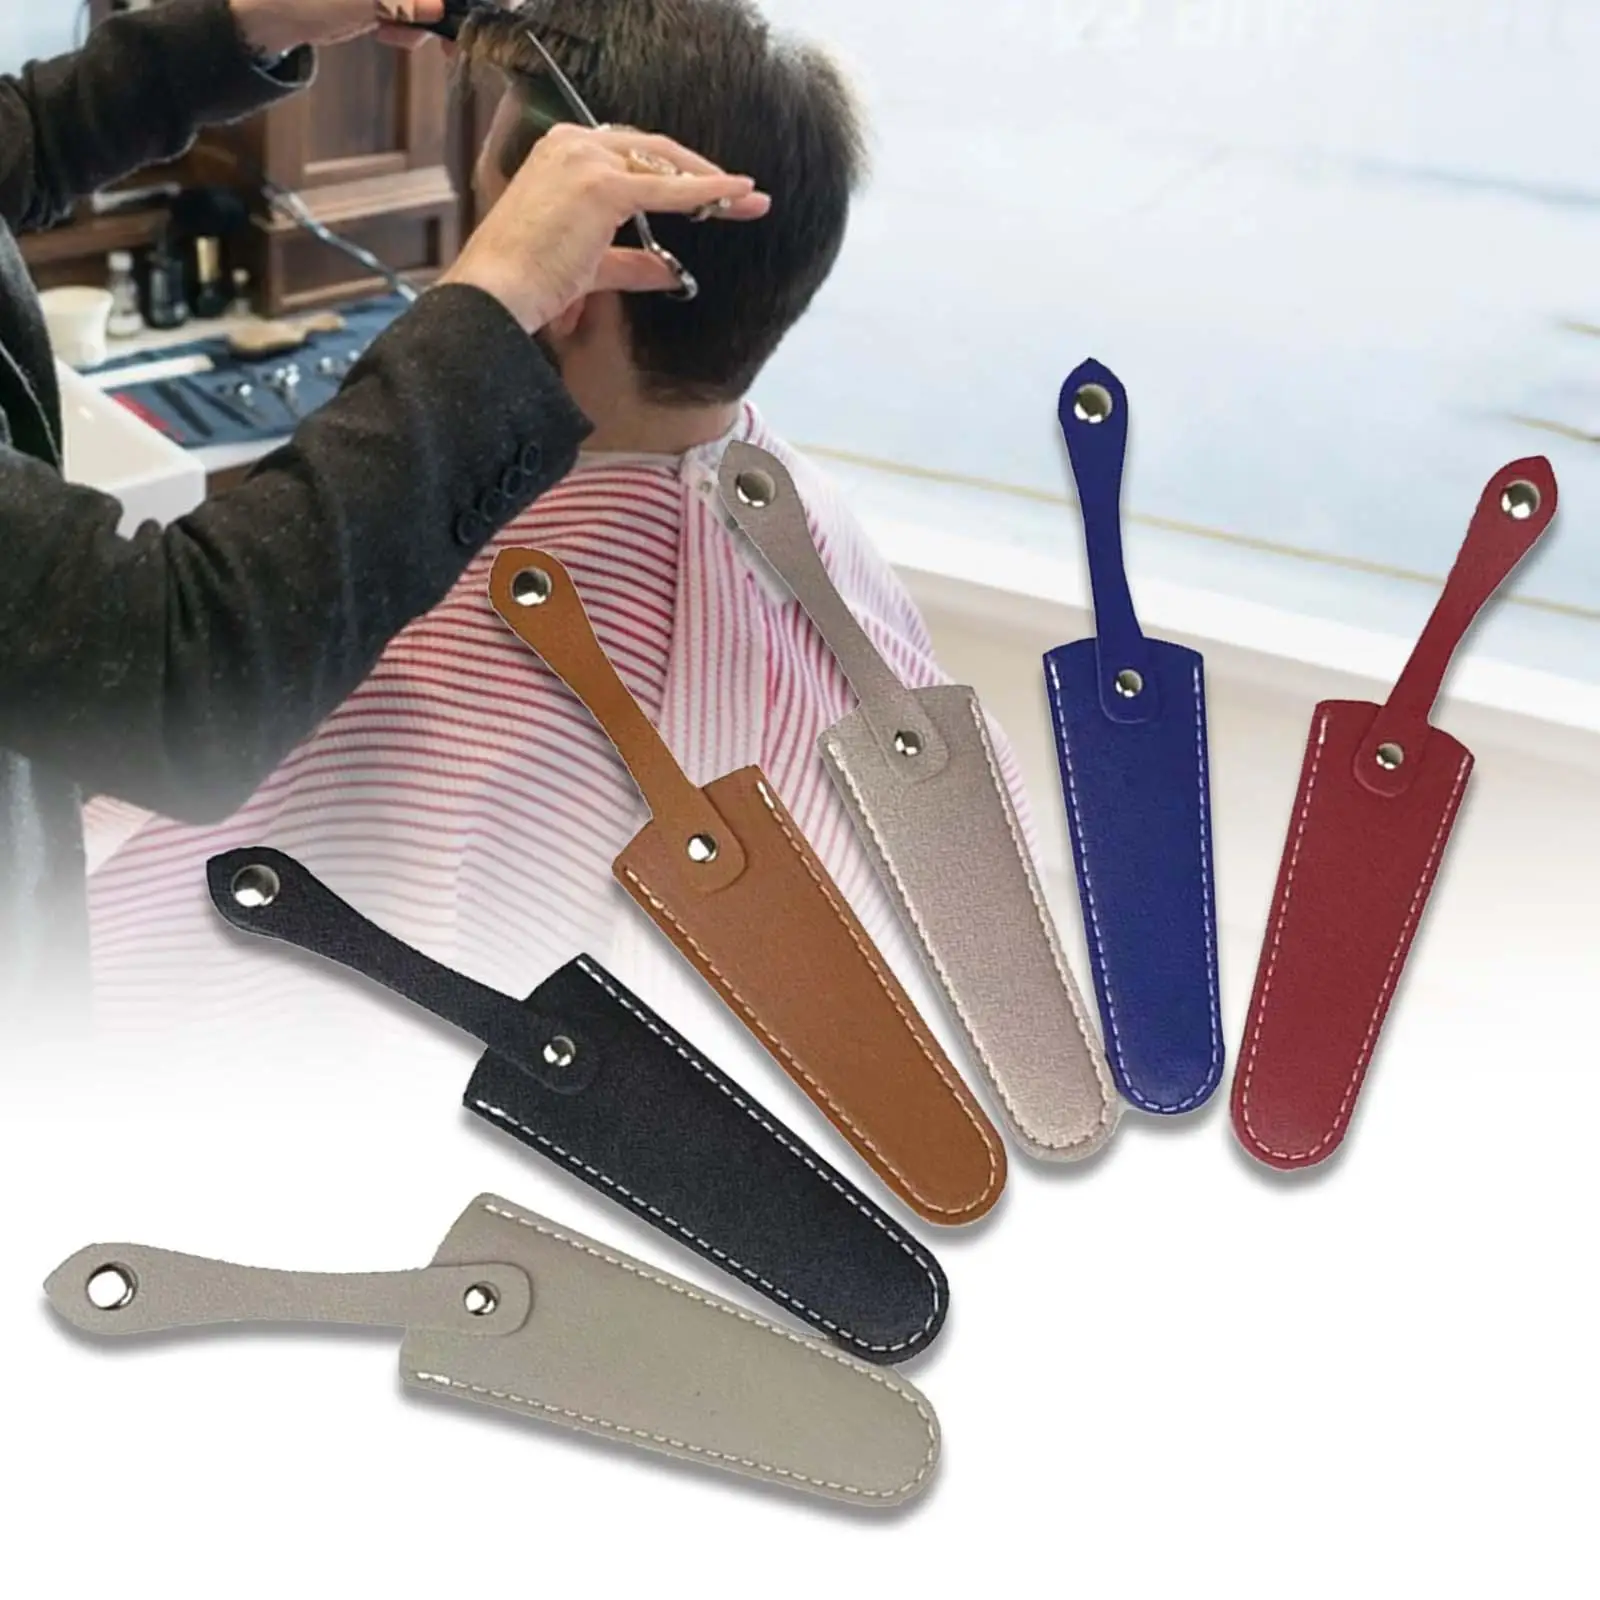 6x Scissors Sheath Compact PU Leather Collect Bags Scissors Safety Sheath Bag for Hair Cutting Scissors Embroidery Hairdressers